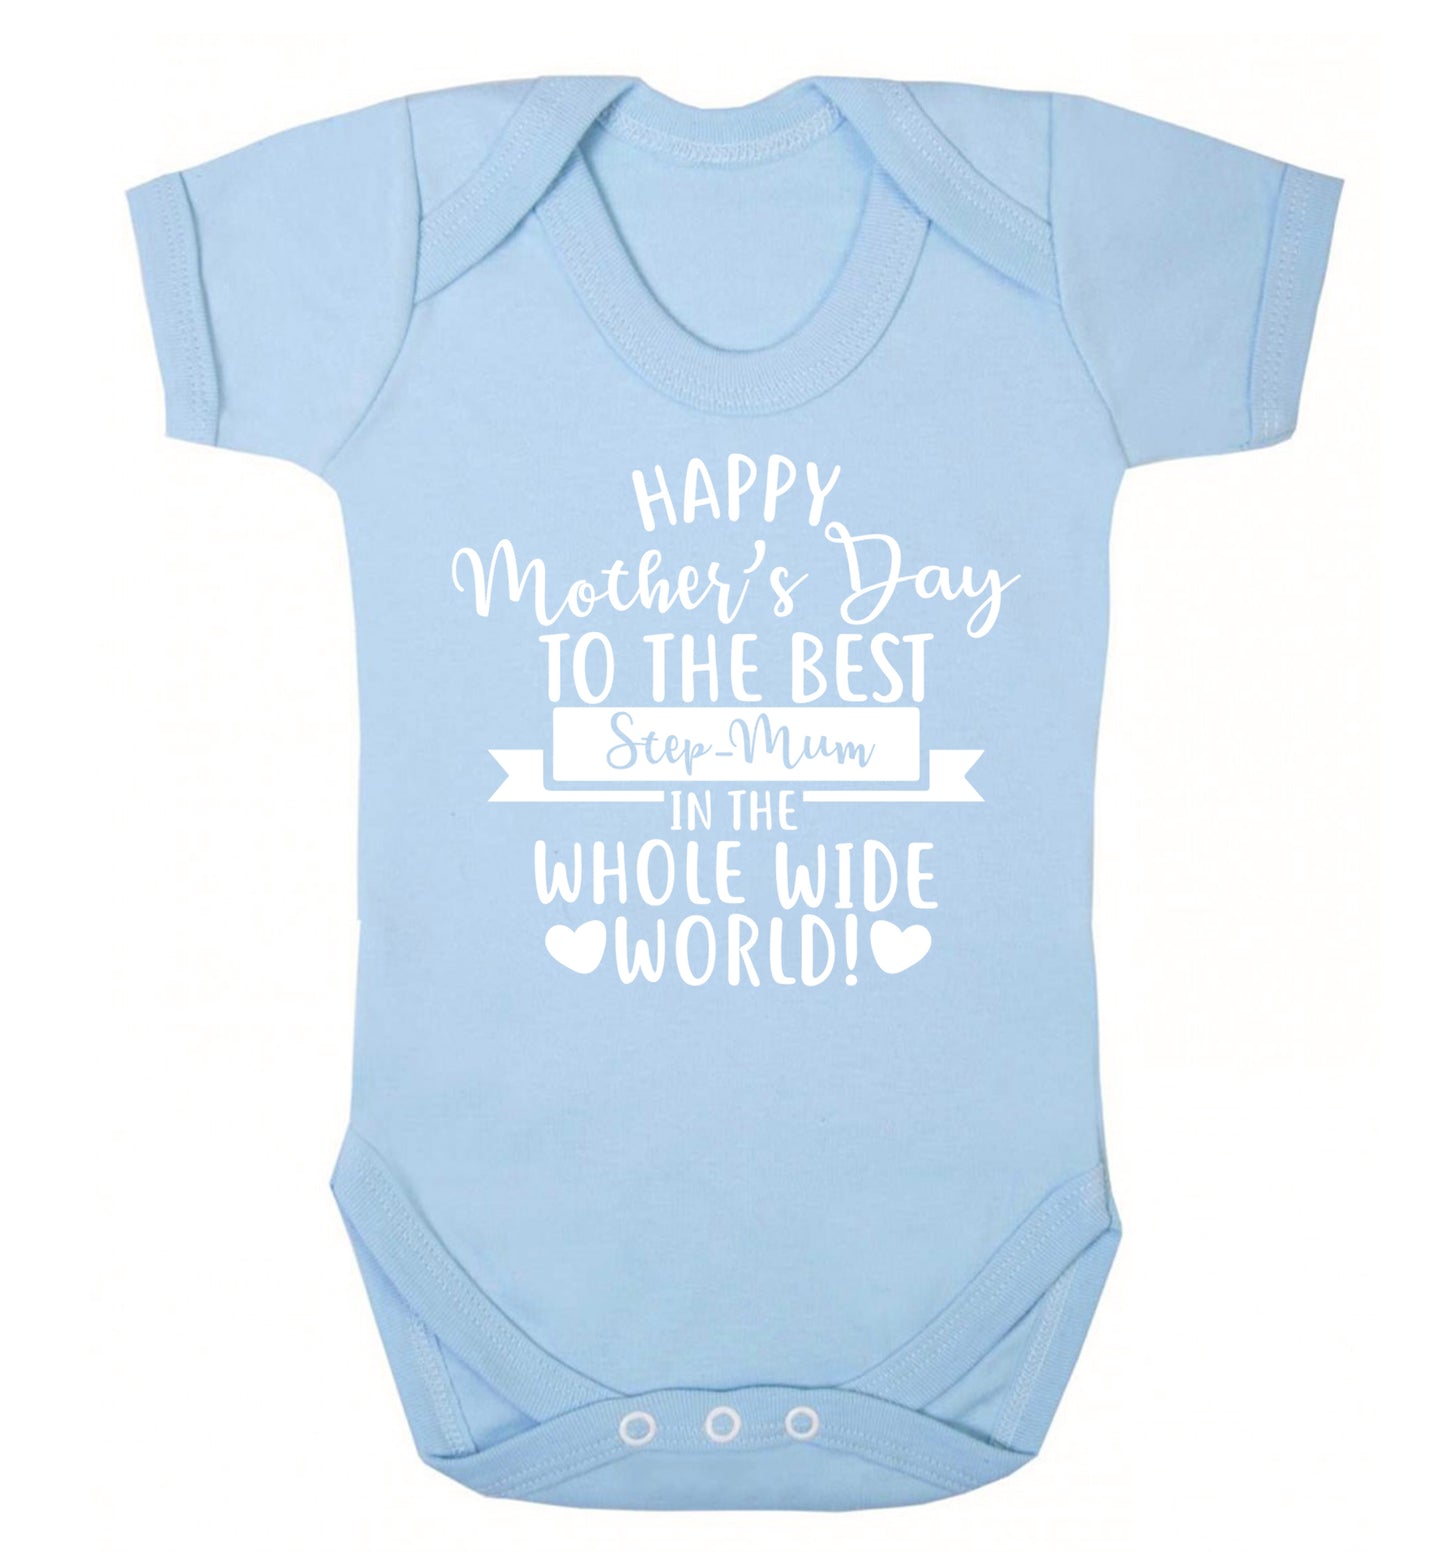 Happy mother's day to the best step-mum in the world Baby Vest pale blue 18-24 months